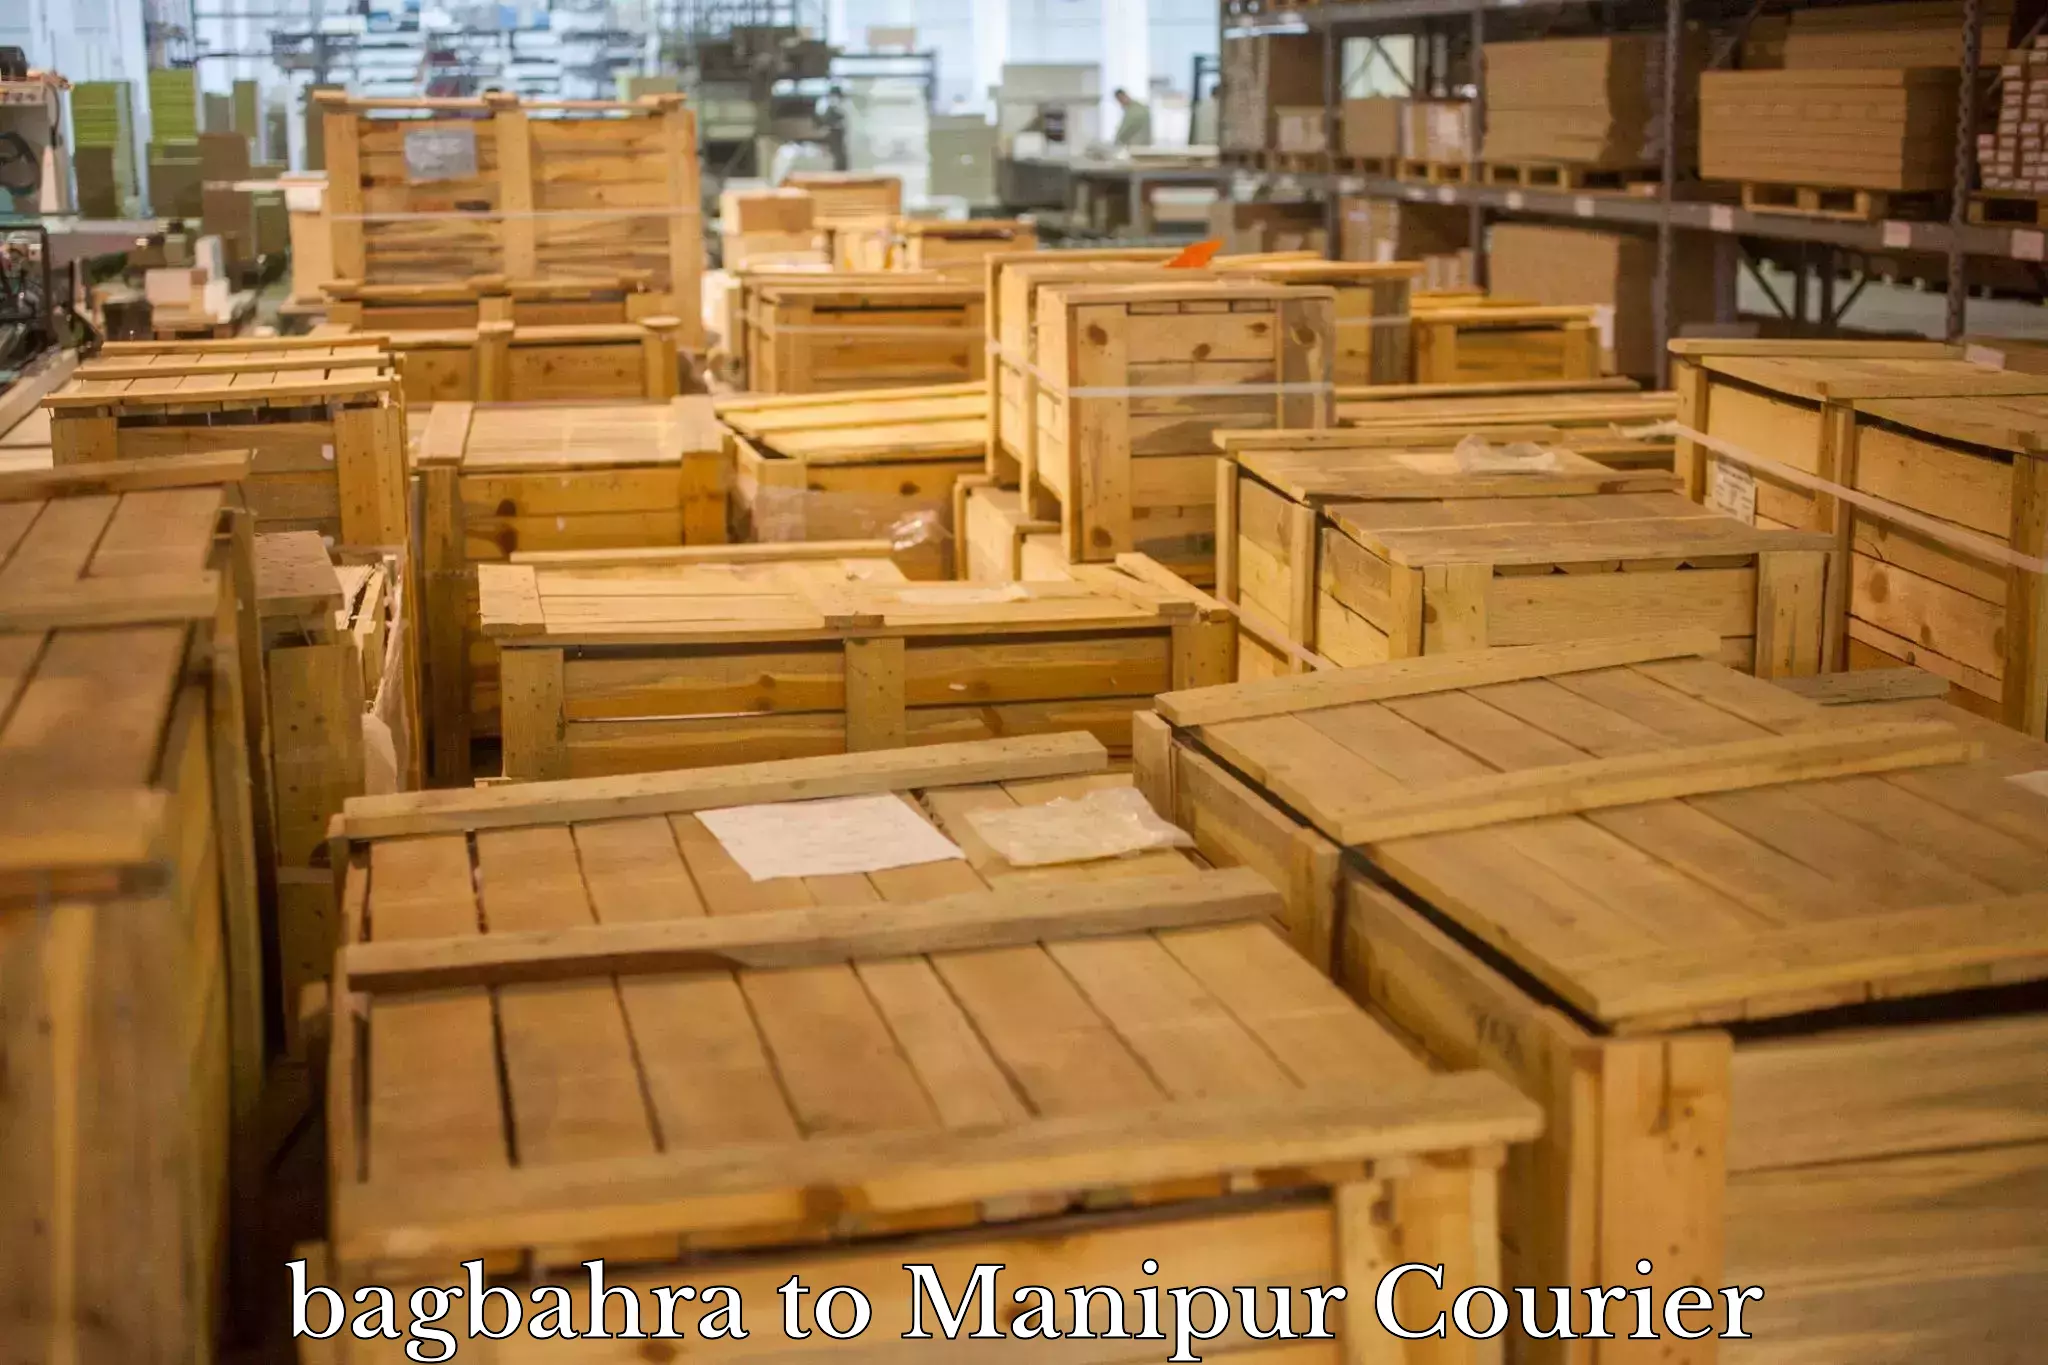 Express logistics in bagbahra to Manipur